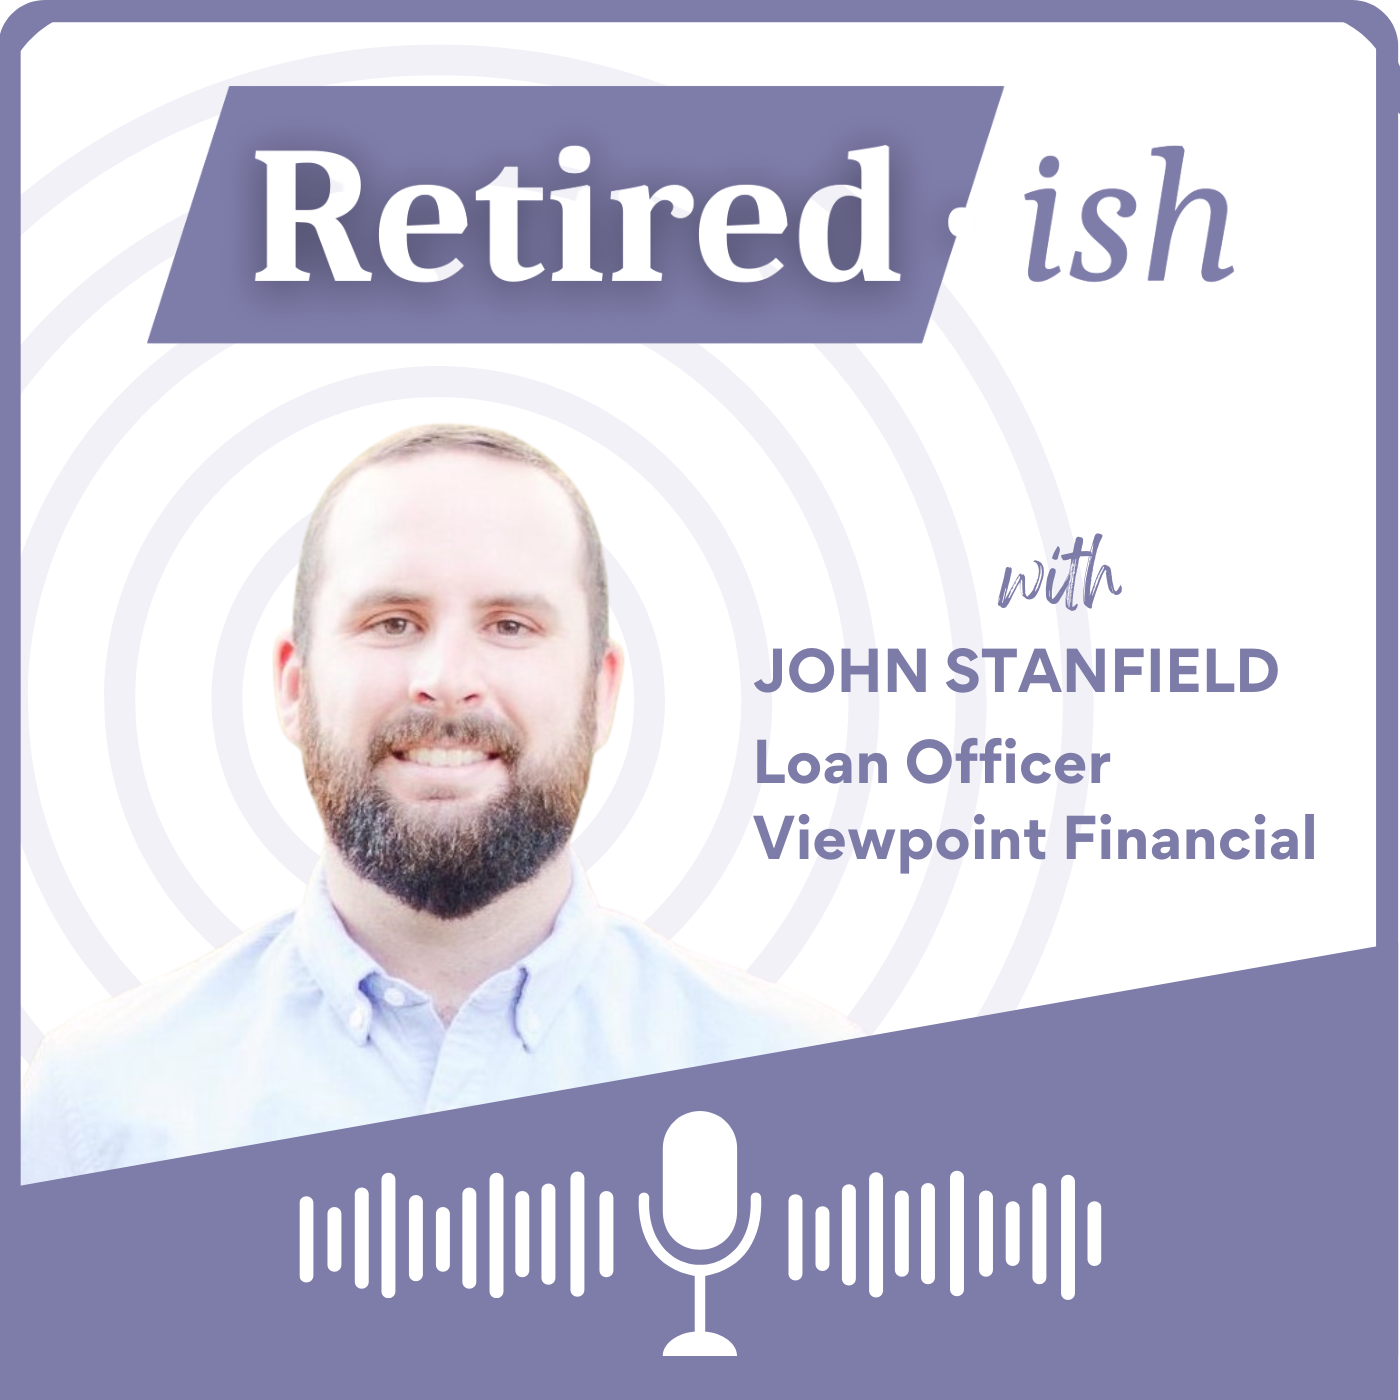 Does Rental Property Make Sense in My Retirement Plan? With John Stanfield